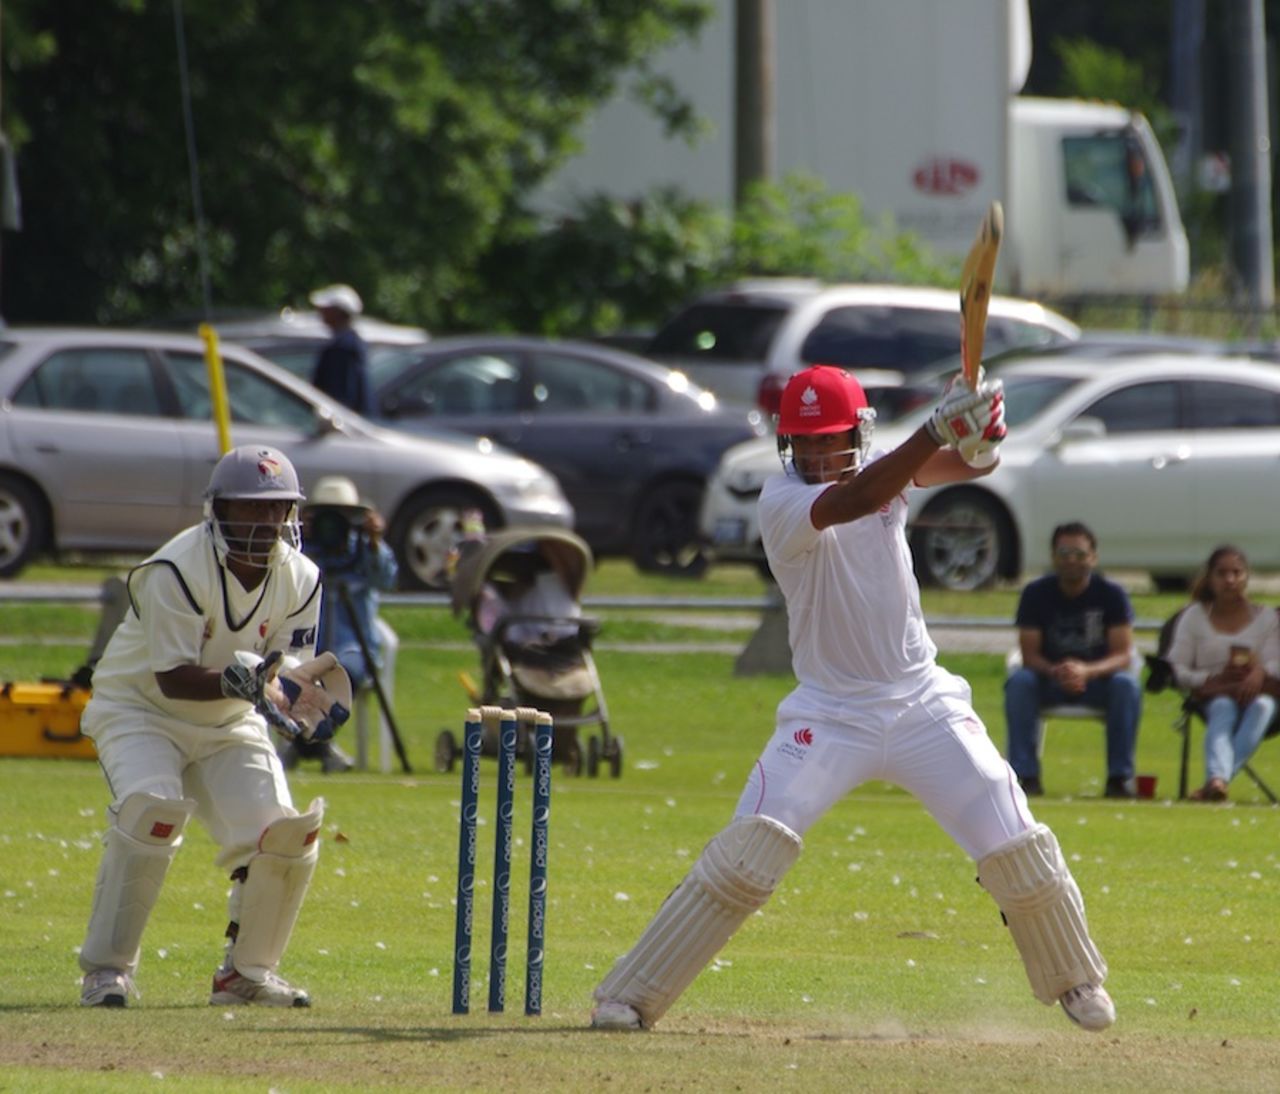 Nitish Kumar cuts off the back foot, Canada v United Arab Emirates, ICC Intercontinental Cup, 3rd day, King City, August 3, 2013